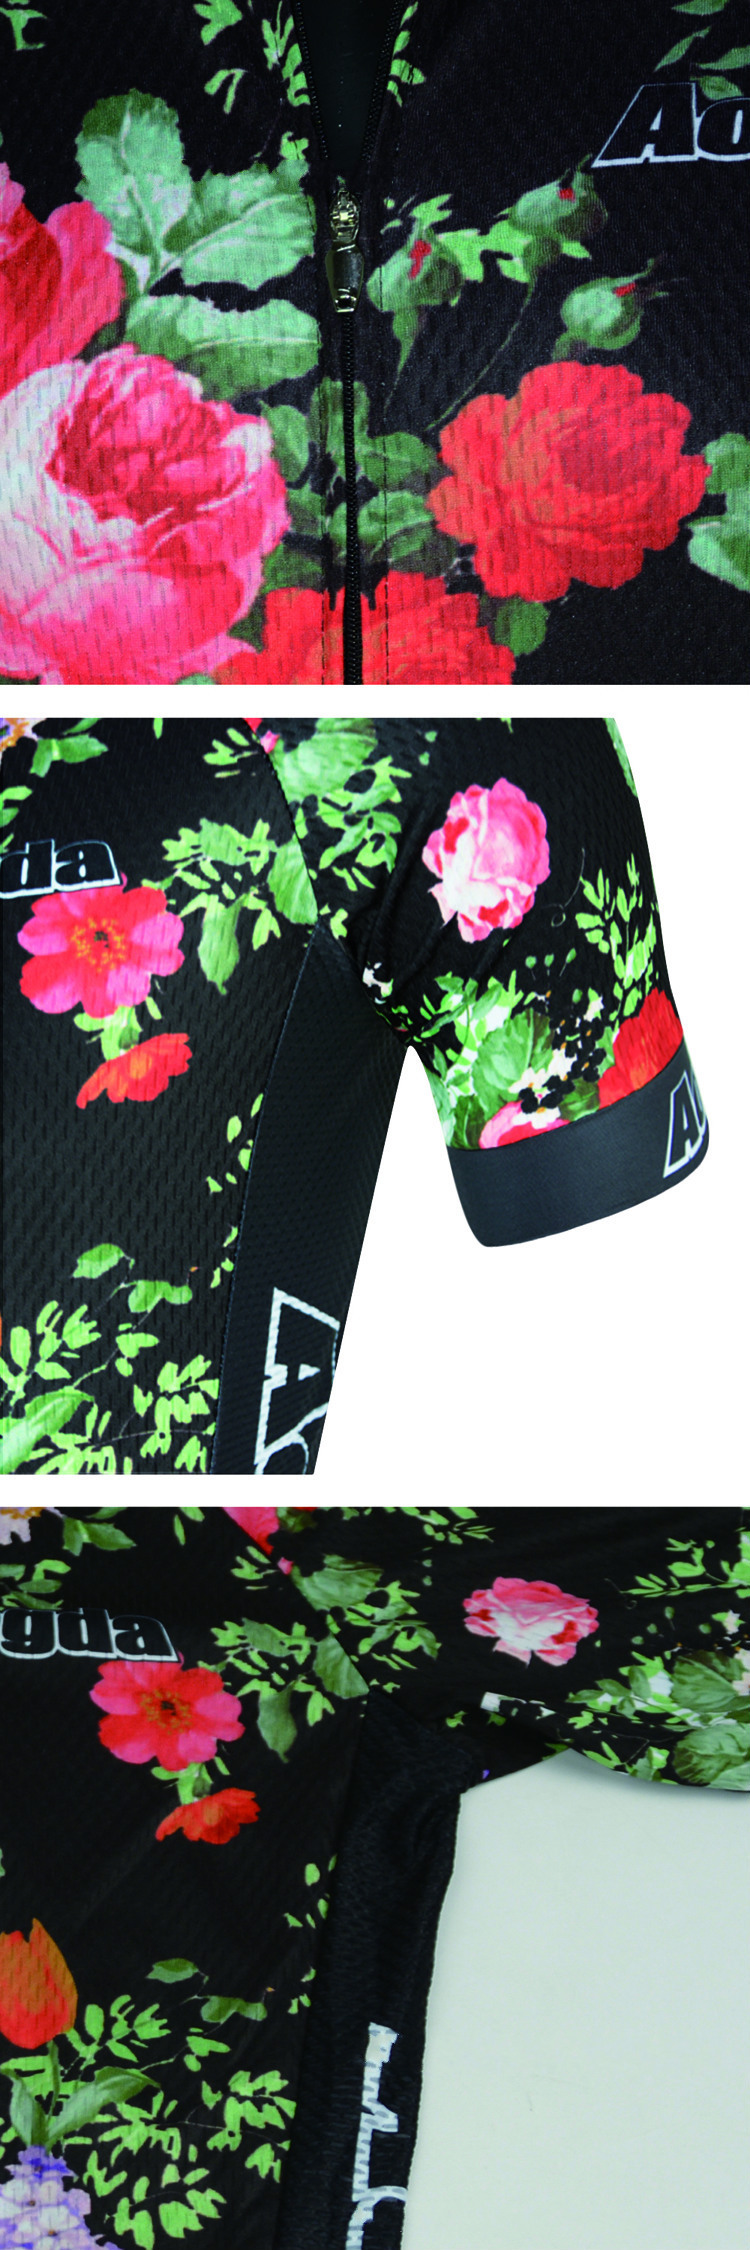 AOGDA-Men-Women-Rose-Short-Sleeve-Cycling-Jersey-Outdoor-Sports-Summer-Polyester-Mesh-Breathable-1144705